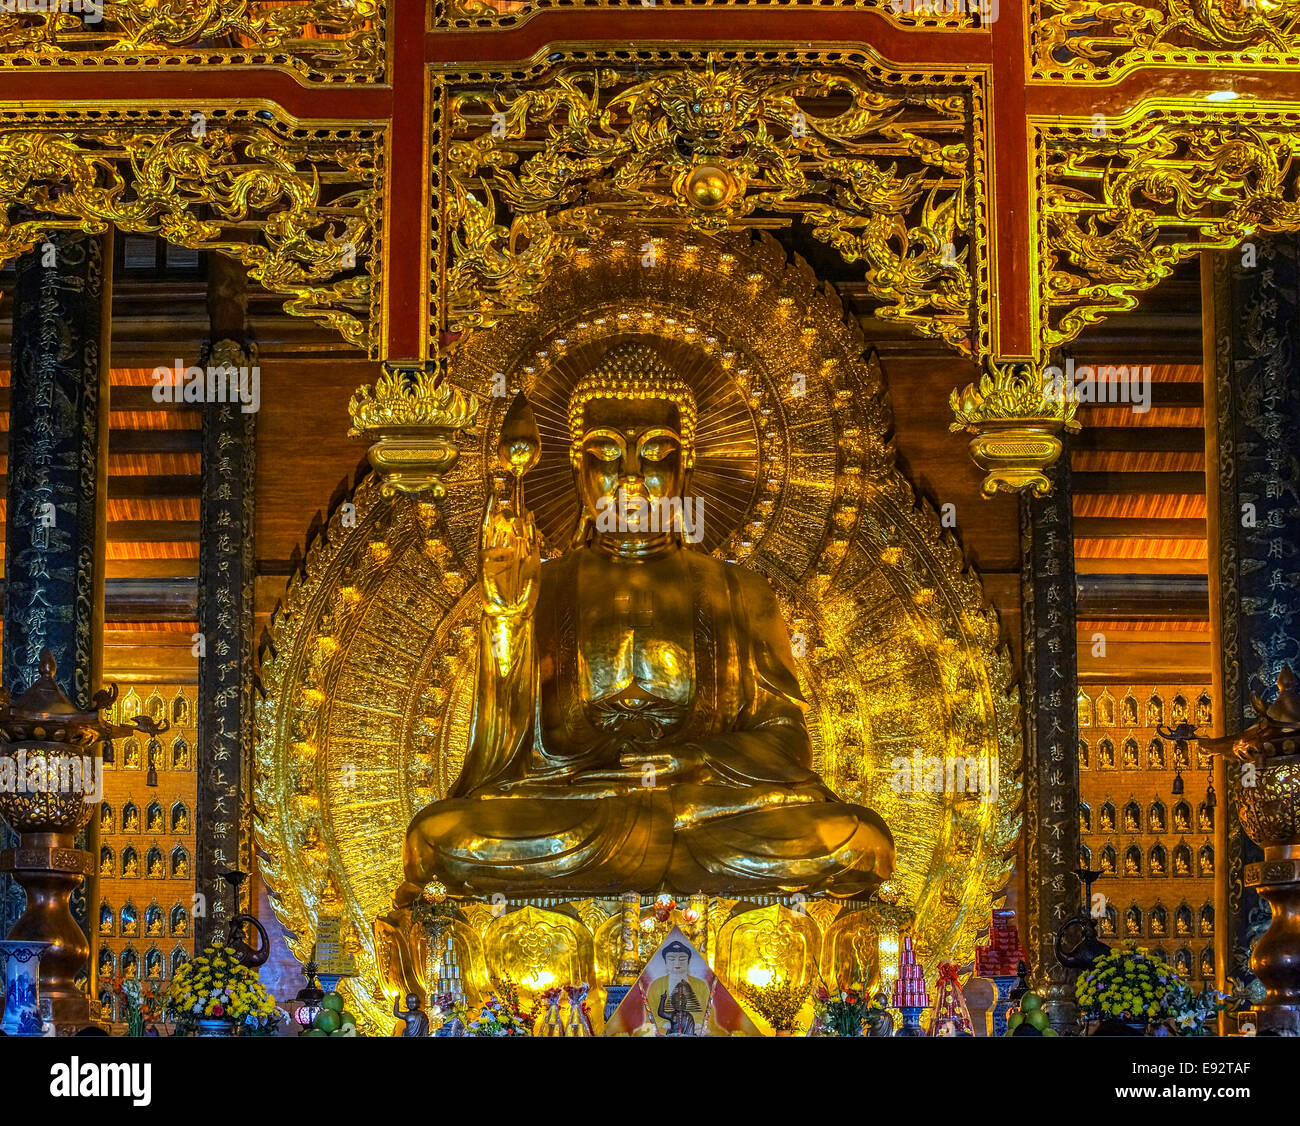 Shiny golden yellow colors on Buddha statue dominate and blind the visitor. Stock Photo